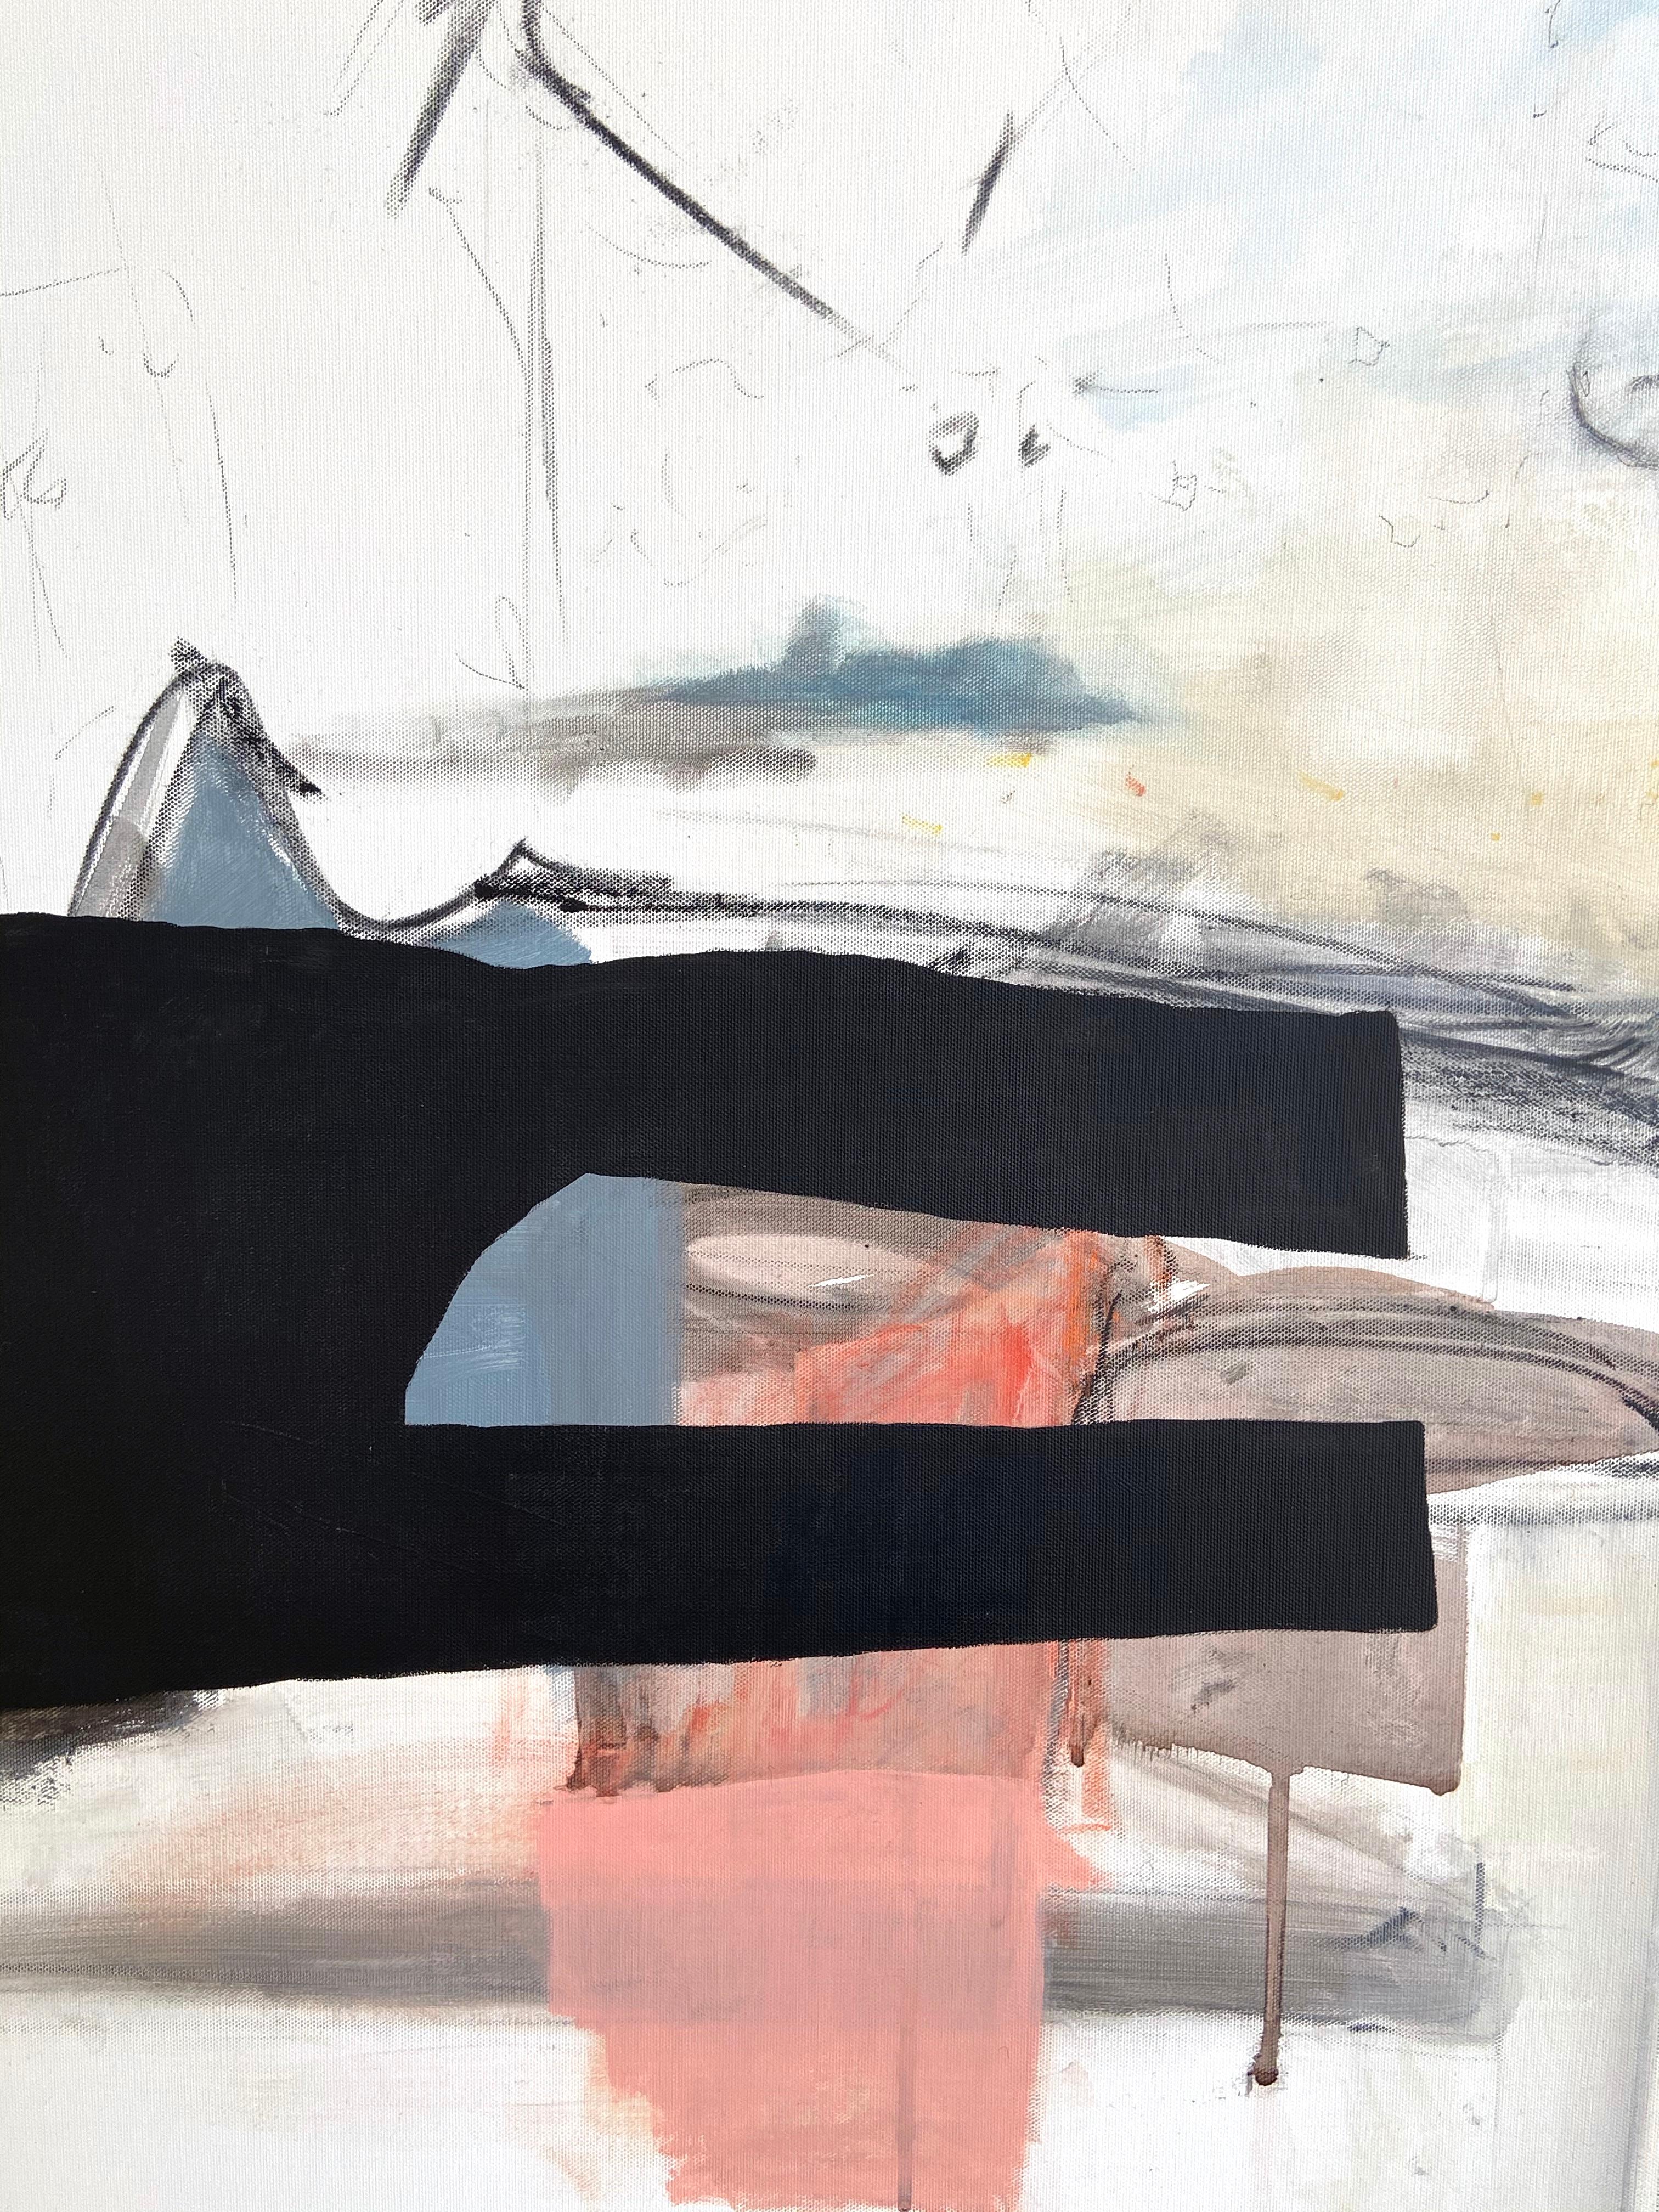 Tienmu horizon (Abstract painting)

Acrylic, charcoal and graphite on un-stretched canvas - Unframed.

Artwork exclusive to IdeelArt.

This artwork will be shipped rolled in a dent-resistant tube.
This method is especially safe for large works, and